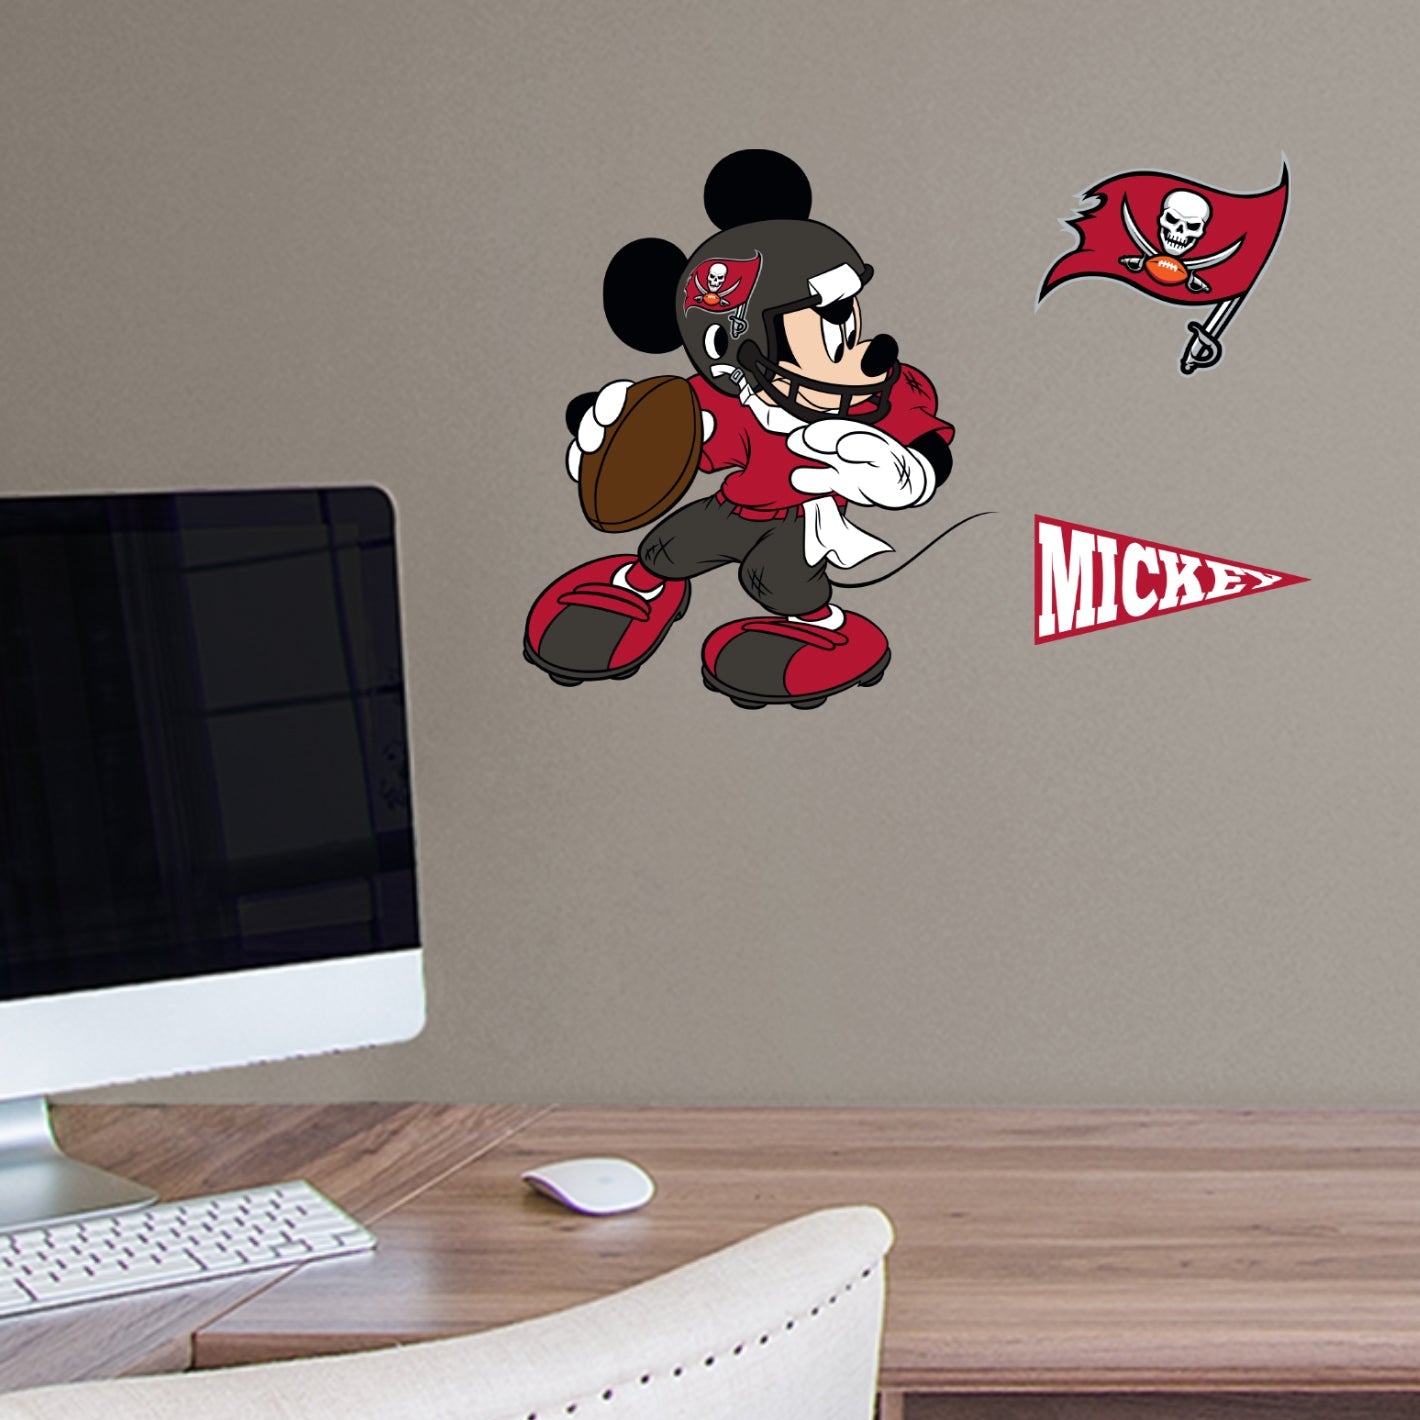 Tampa Bay Buccaneers: Mickey Mouse - Officially Licensed NFL Removable Adhesive Decal